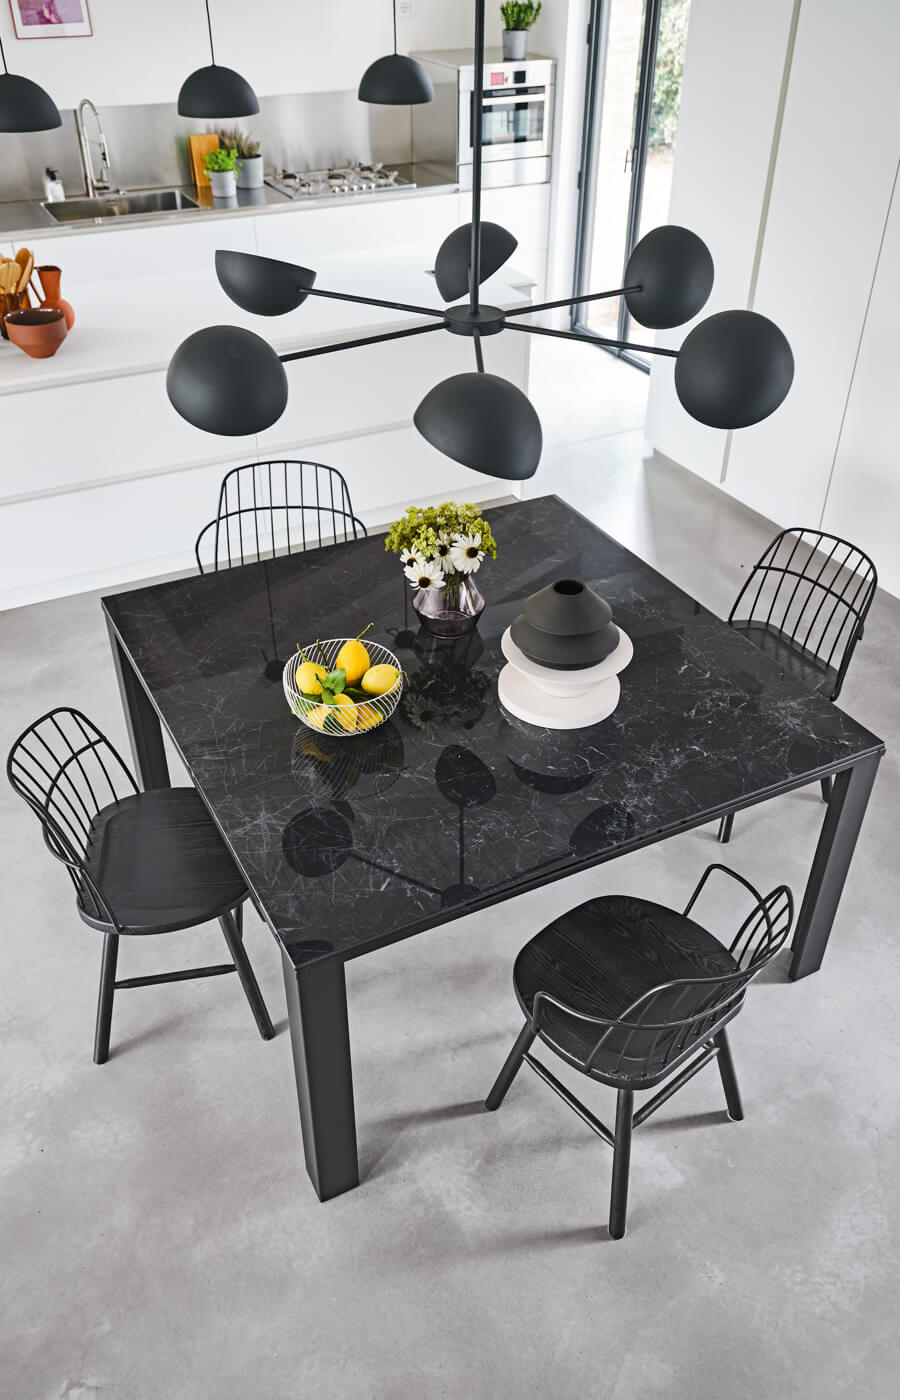 Kitchen furniture: Midj's accessories for contemporary living